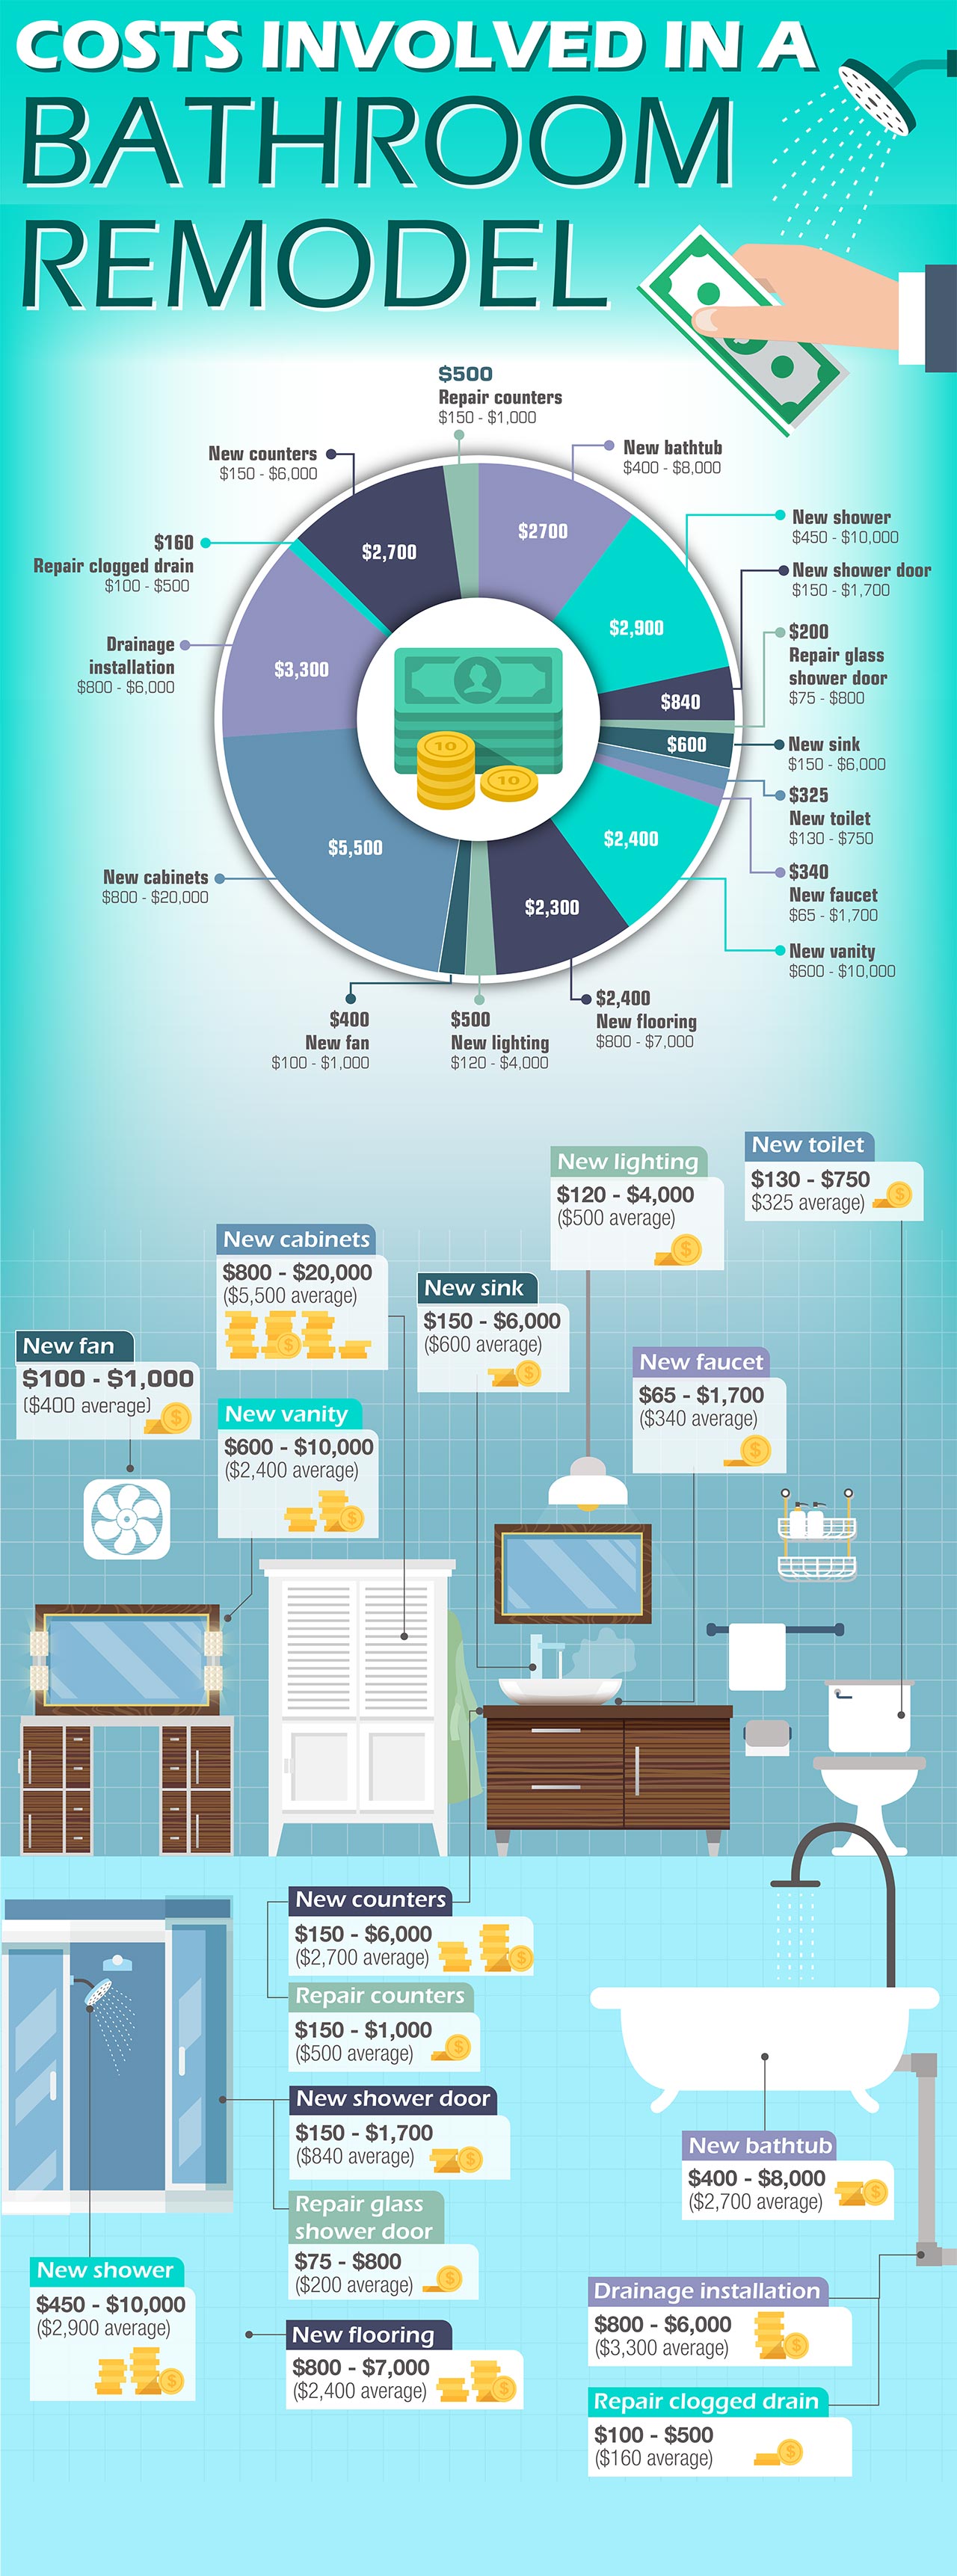 infographic-costs-involved-in-a-bathroom-remodel-content